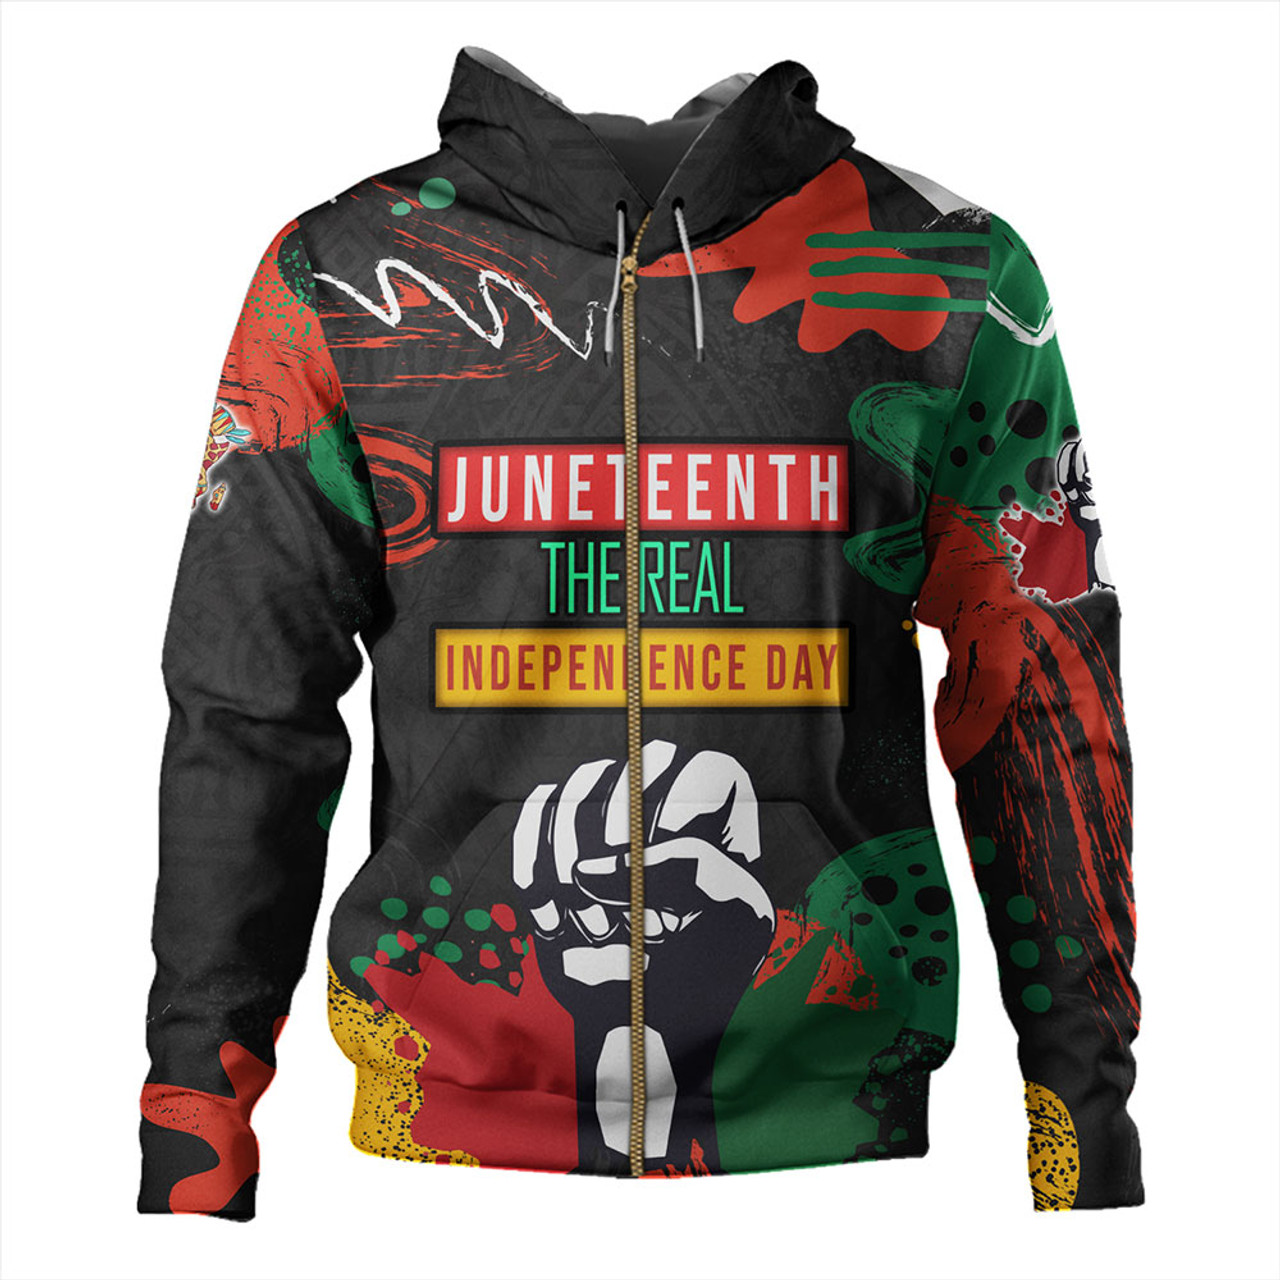 Juneteenth The Real Independence Day Hoodie